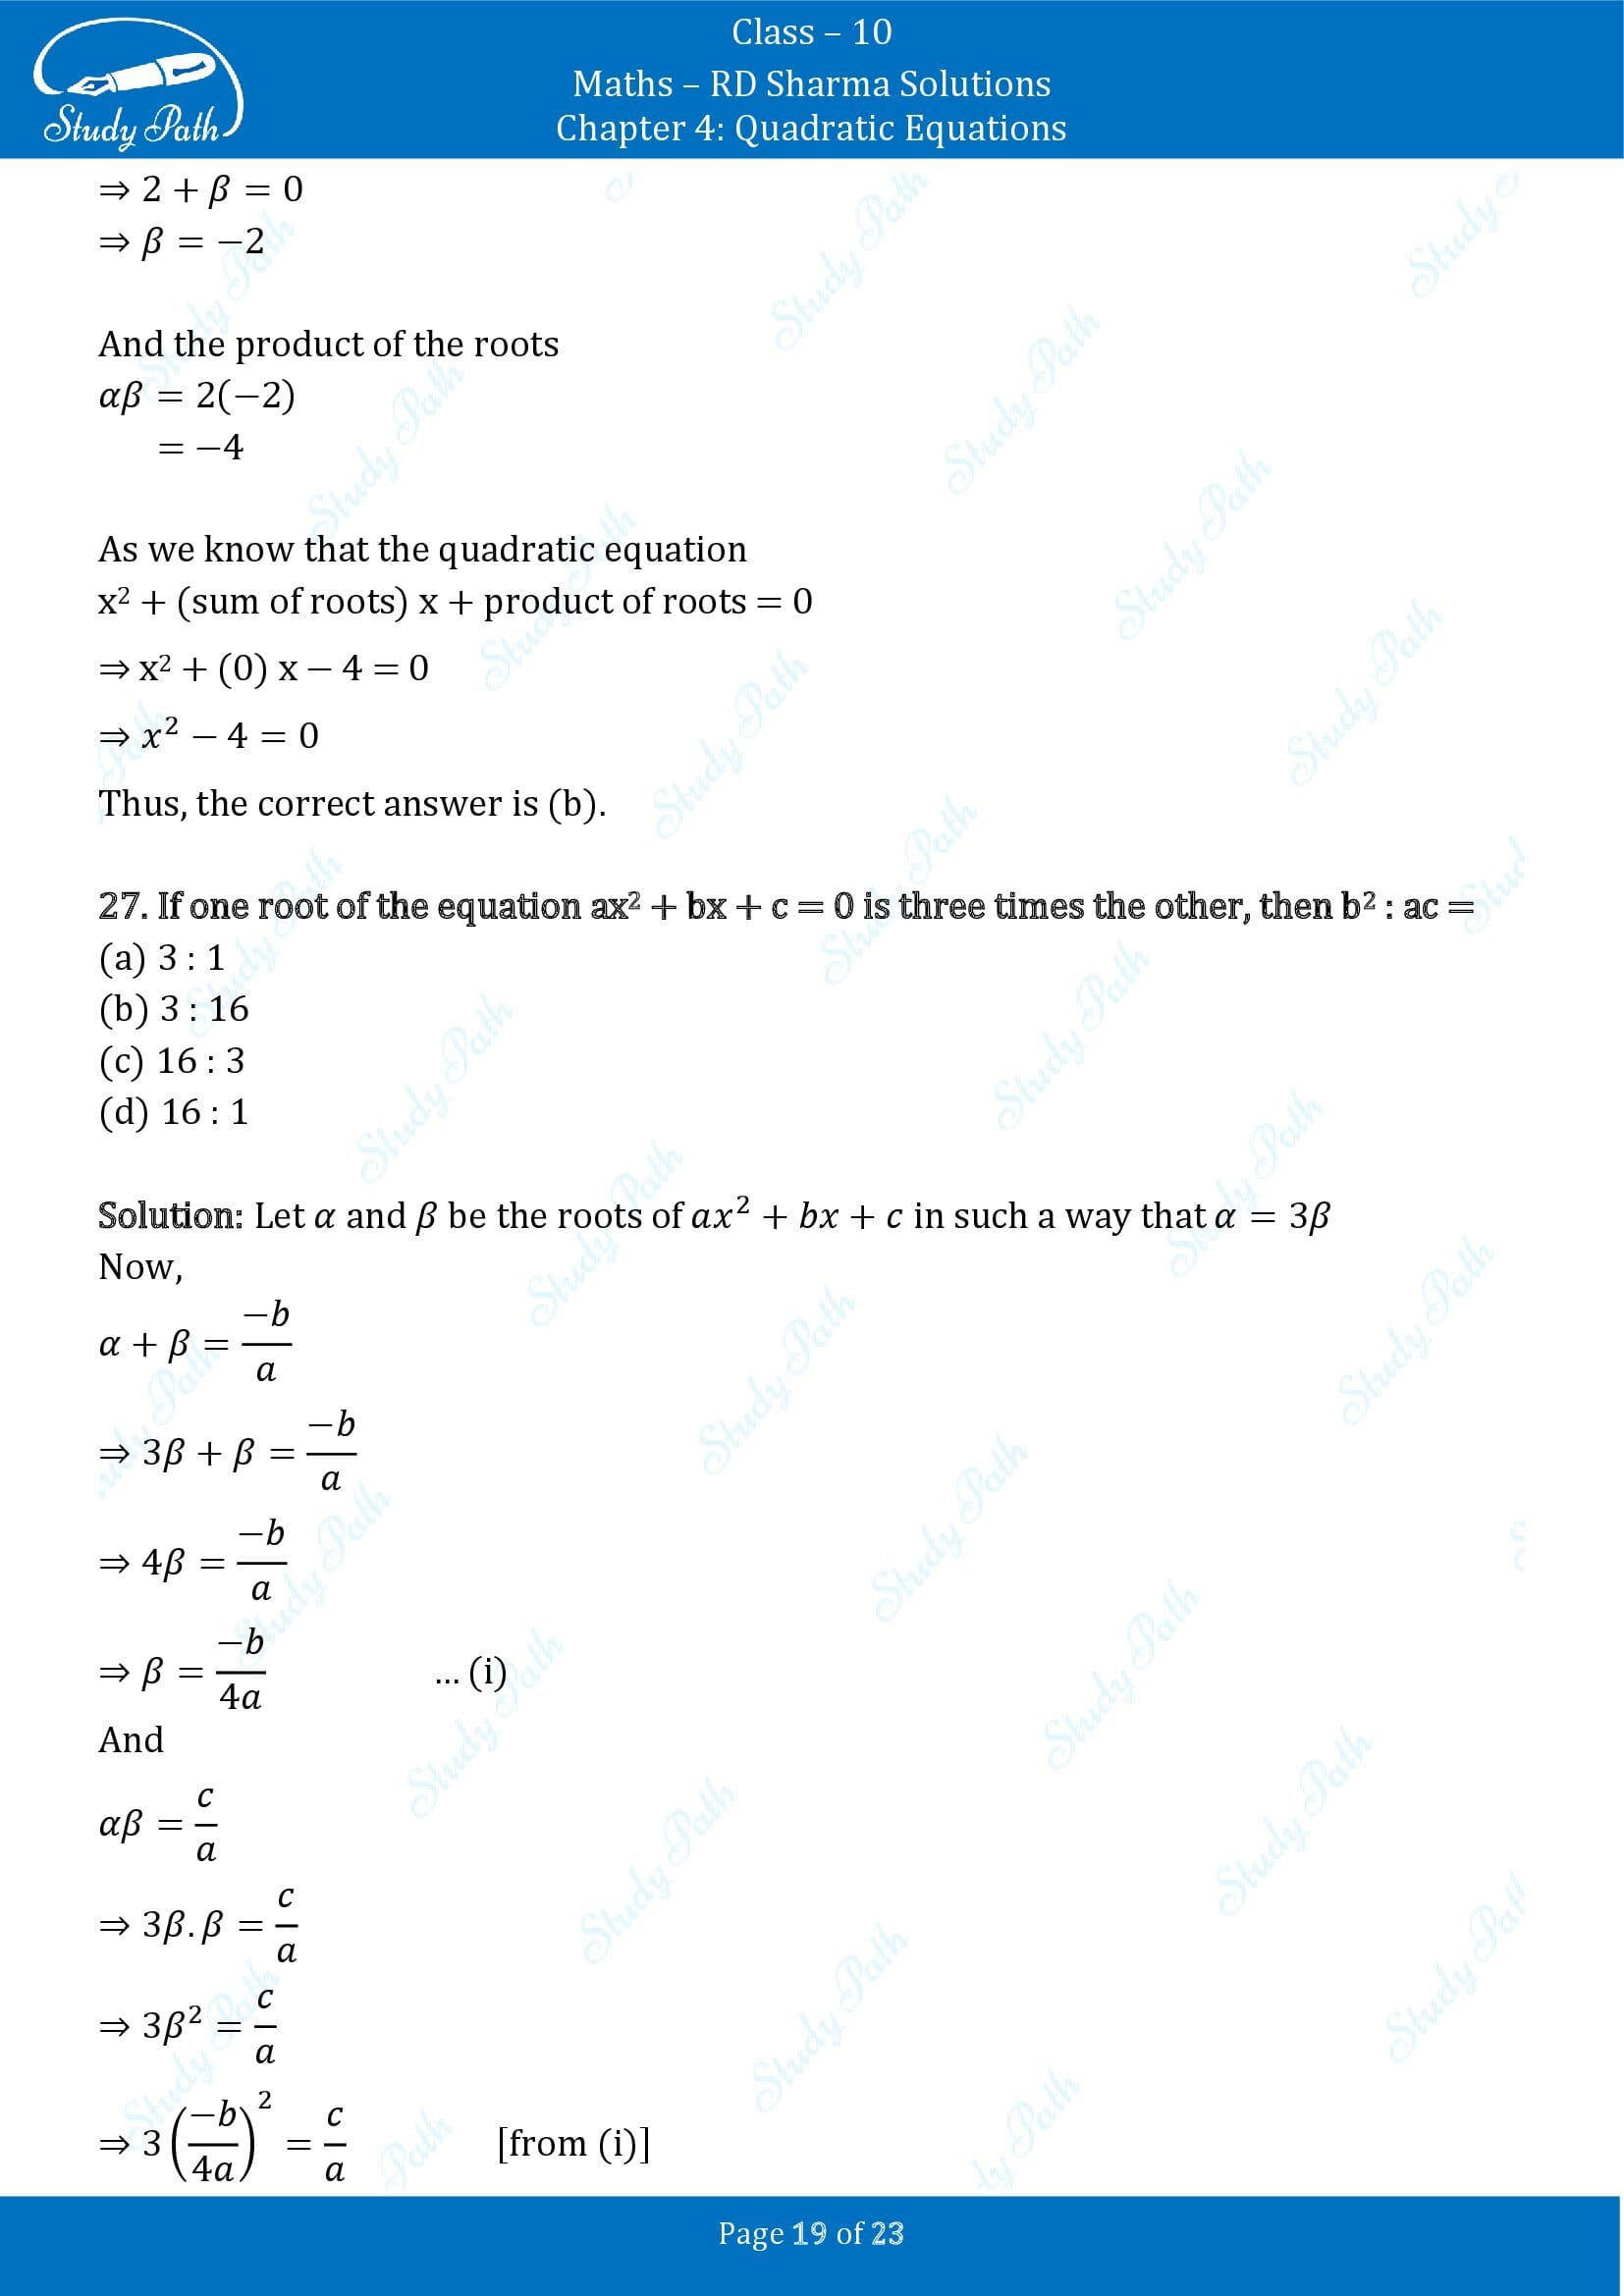 RD Sharma Solutions Class 10 Chapter 4 Quadratic Equations Multiple Choice Questions MCQs 00019